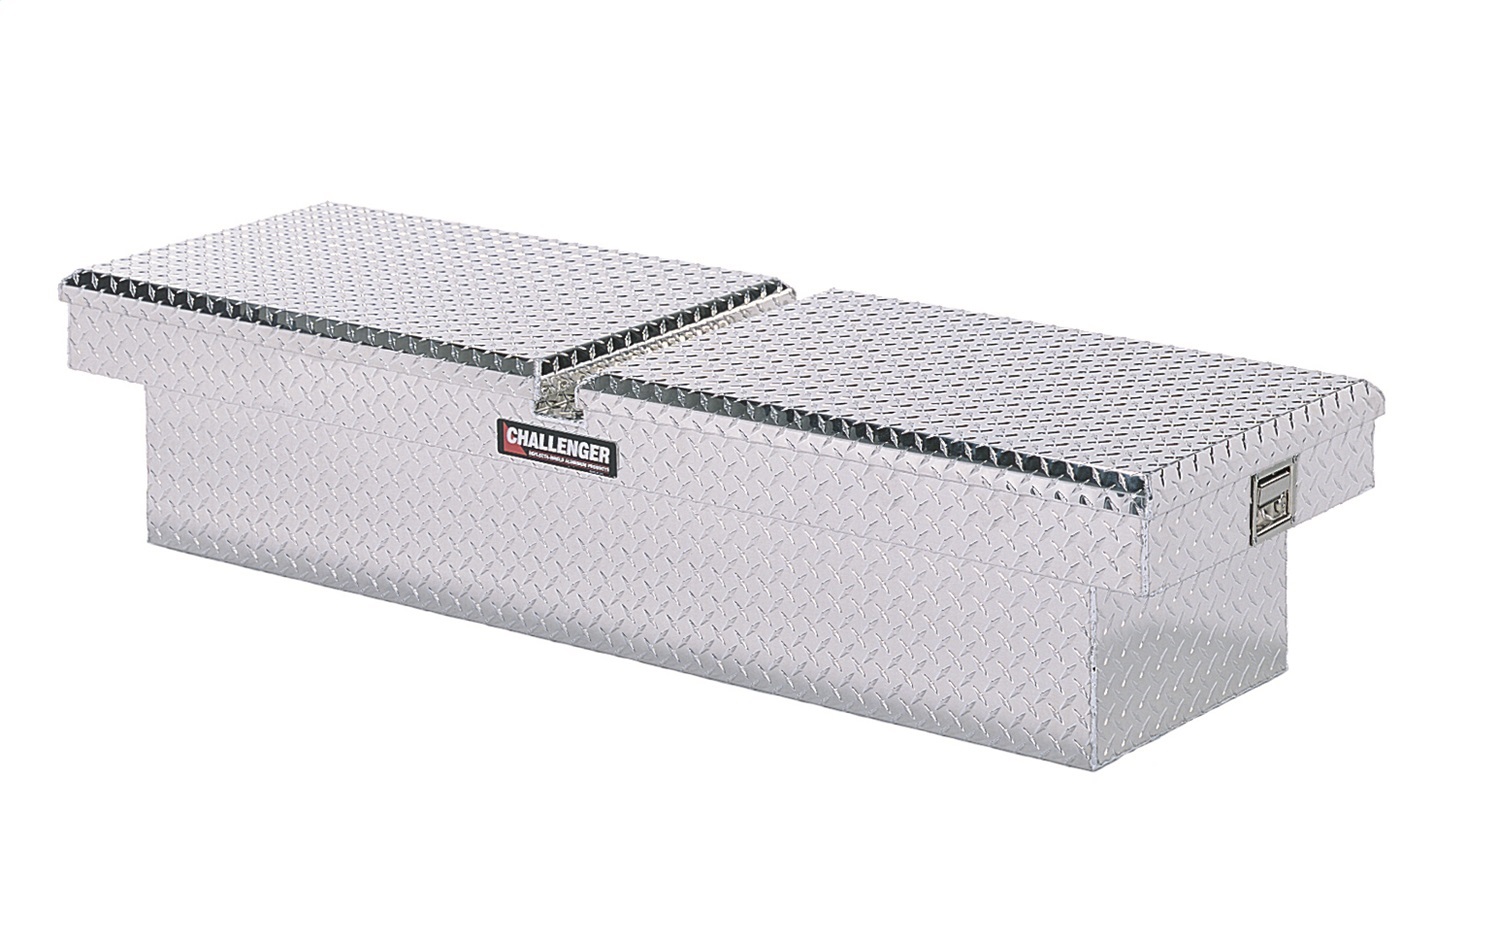 Deflecta-Shield Aluminum Deflecta-Shield Aluminum 5950 Challenger; Gull Wing Crossover Storage Box